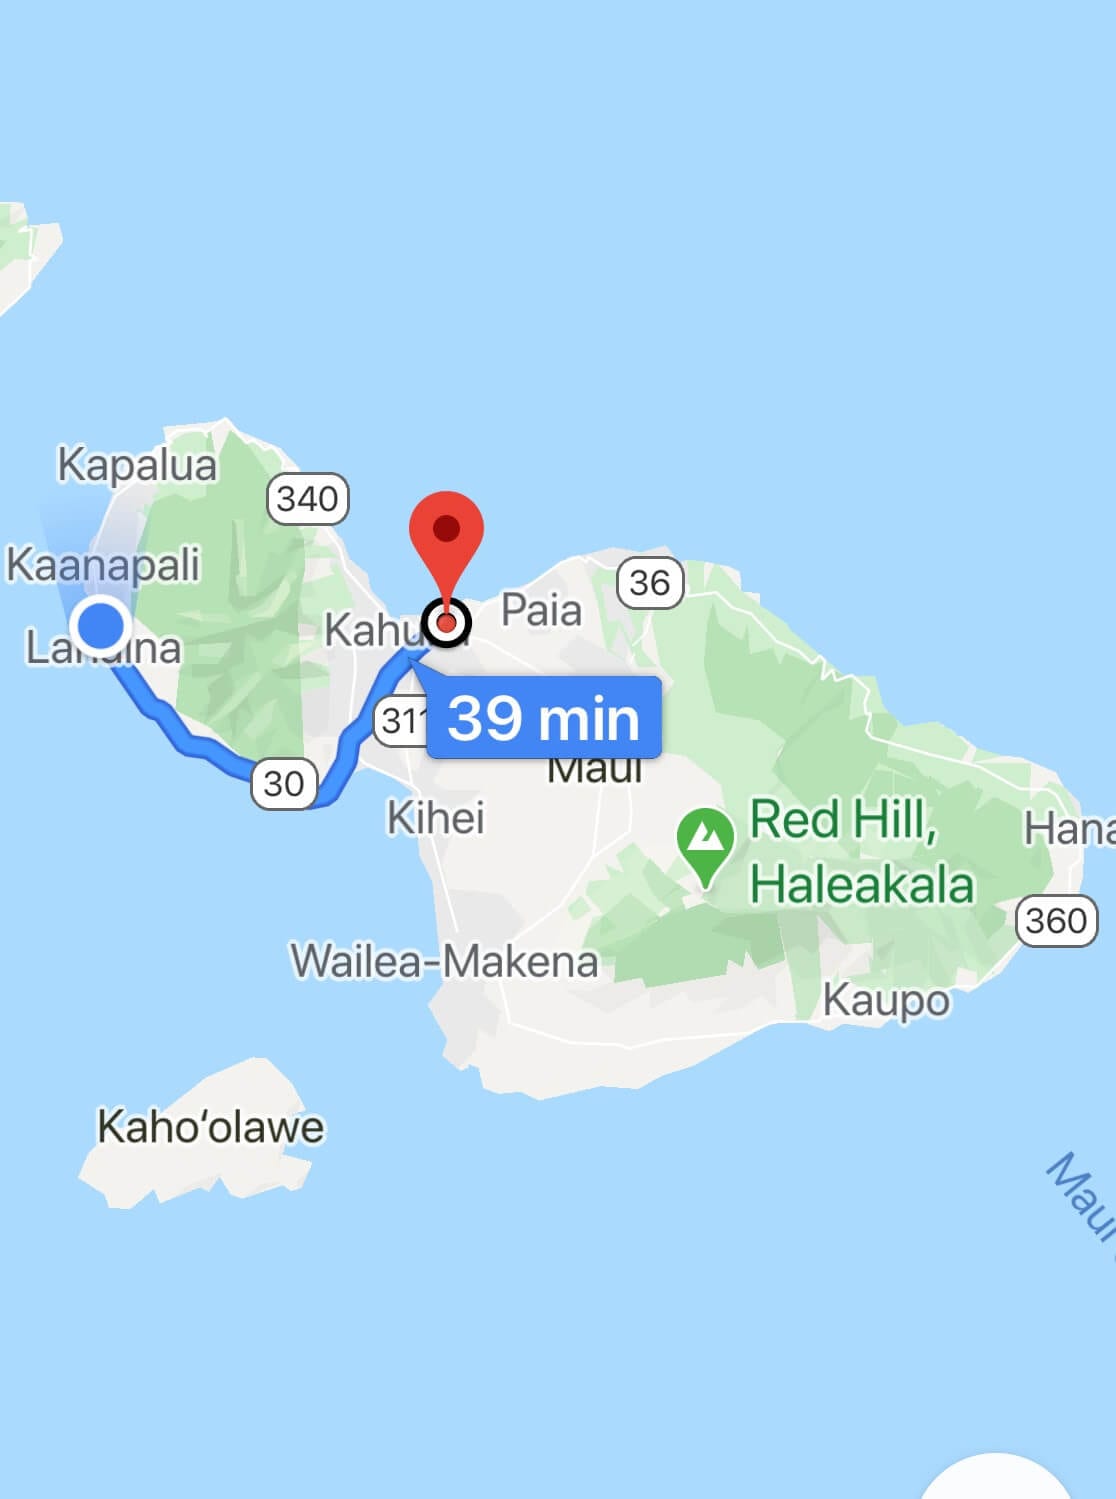 Map of Maui and directions from the airport to Lahaina 